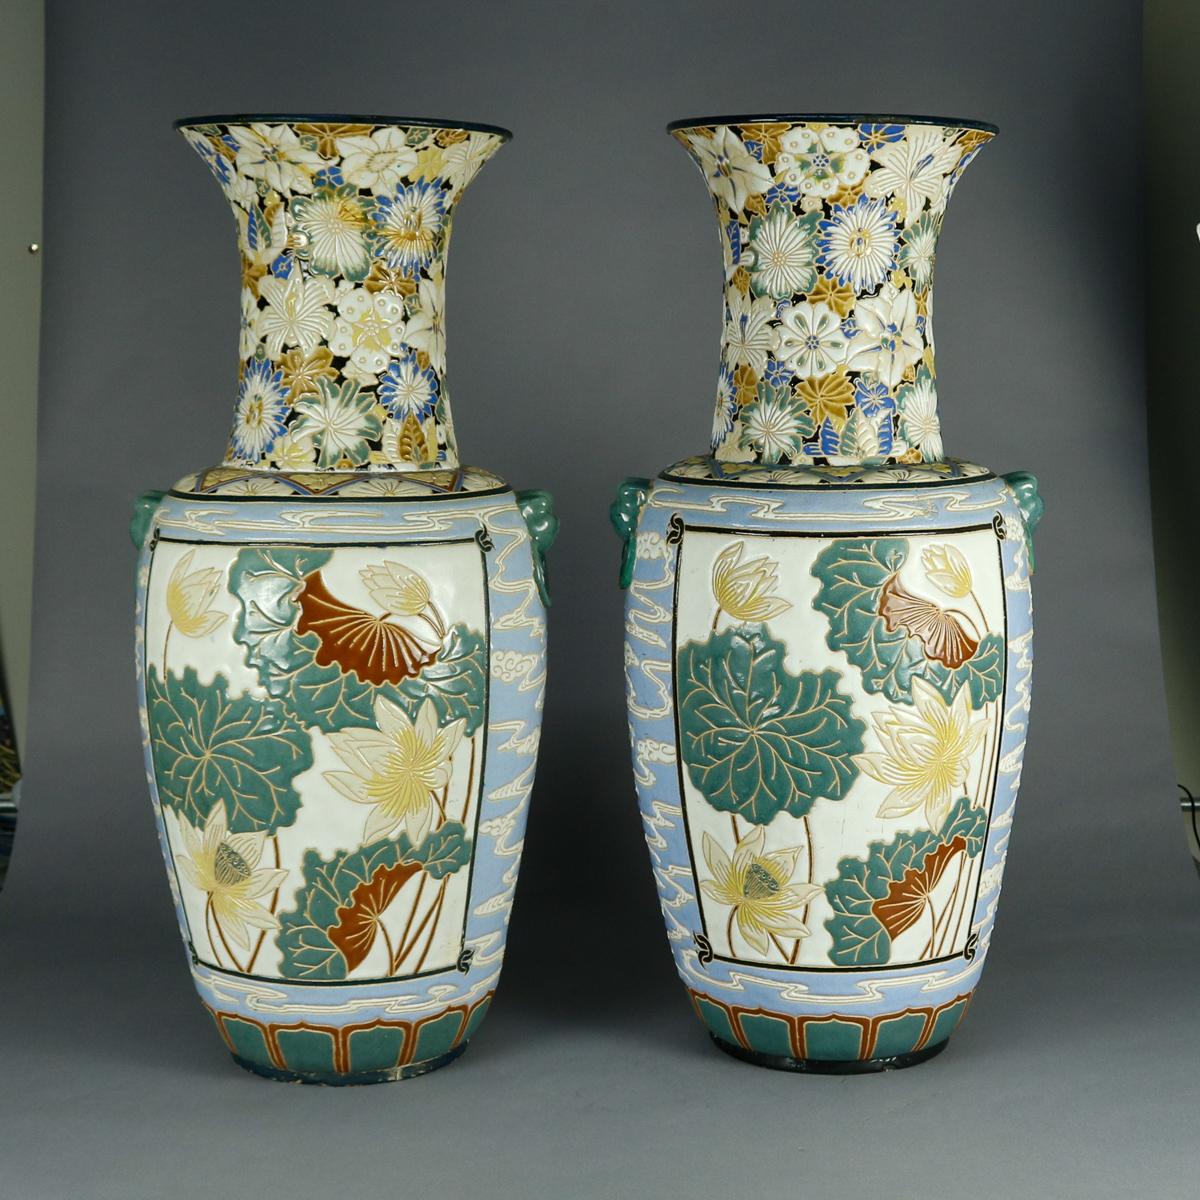 An antique pair of monumental Chinese floor vases offer urn form with enameled embossed floral reserves, all-over floral neck motif, vessel with all-over stylized cloud motif, and figural ring handles, circa 1920

Measures: 34